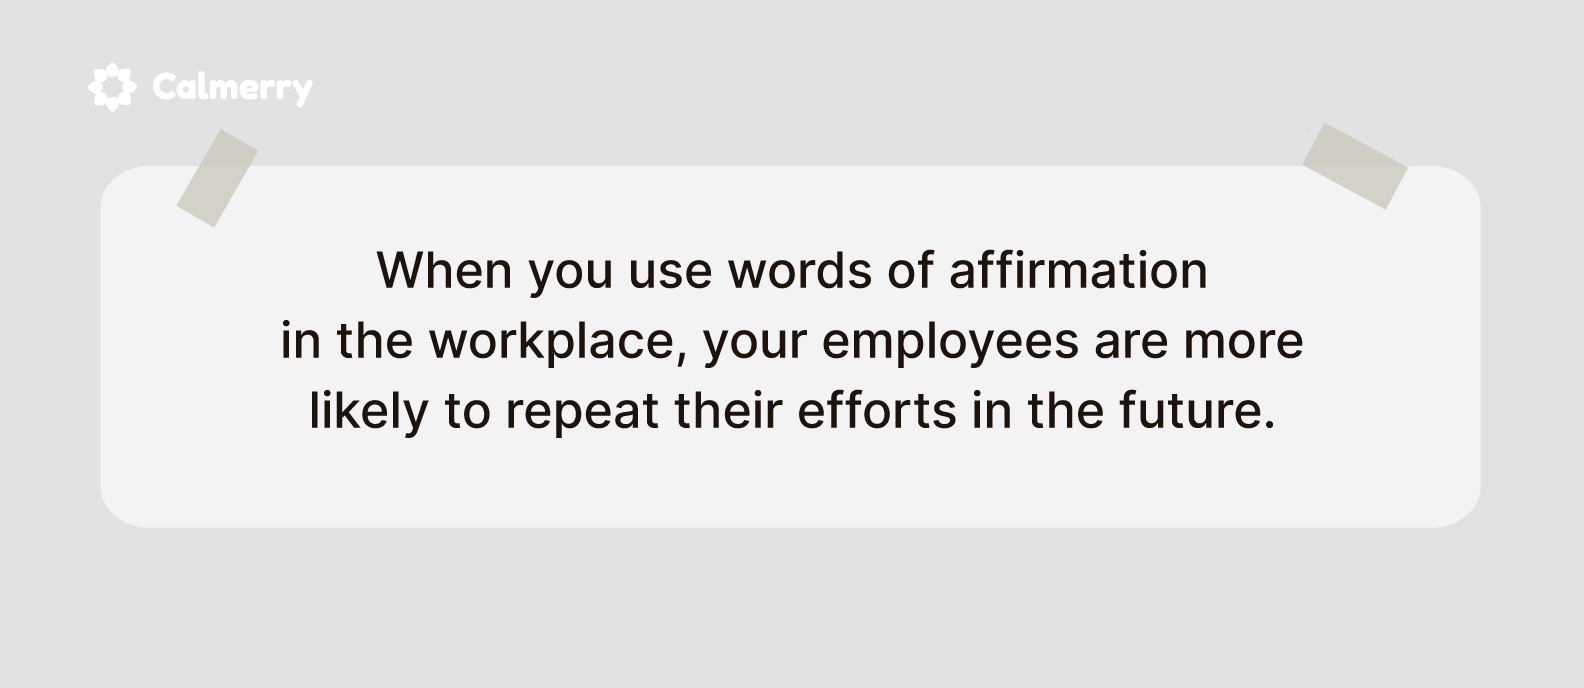 words of affirmation in the workplace